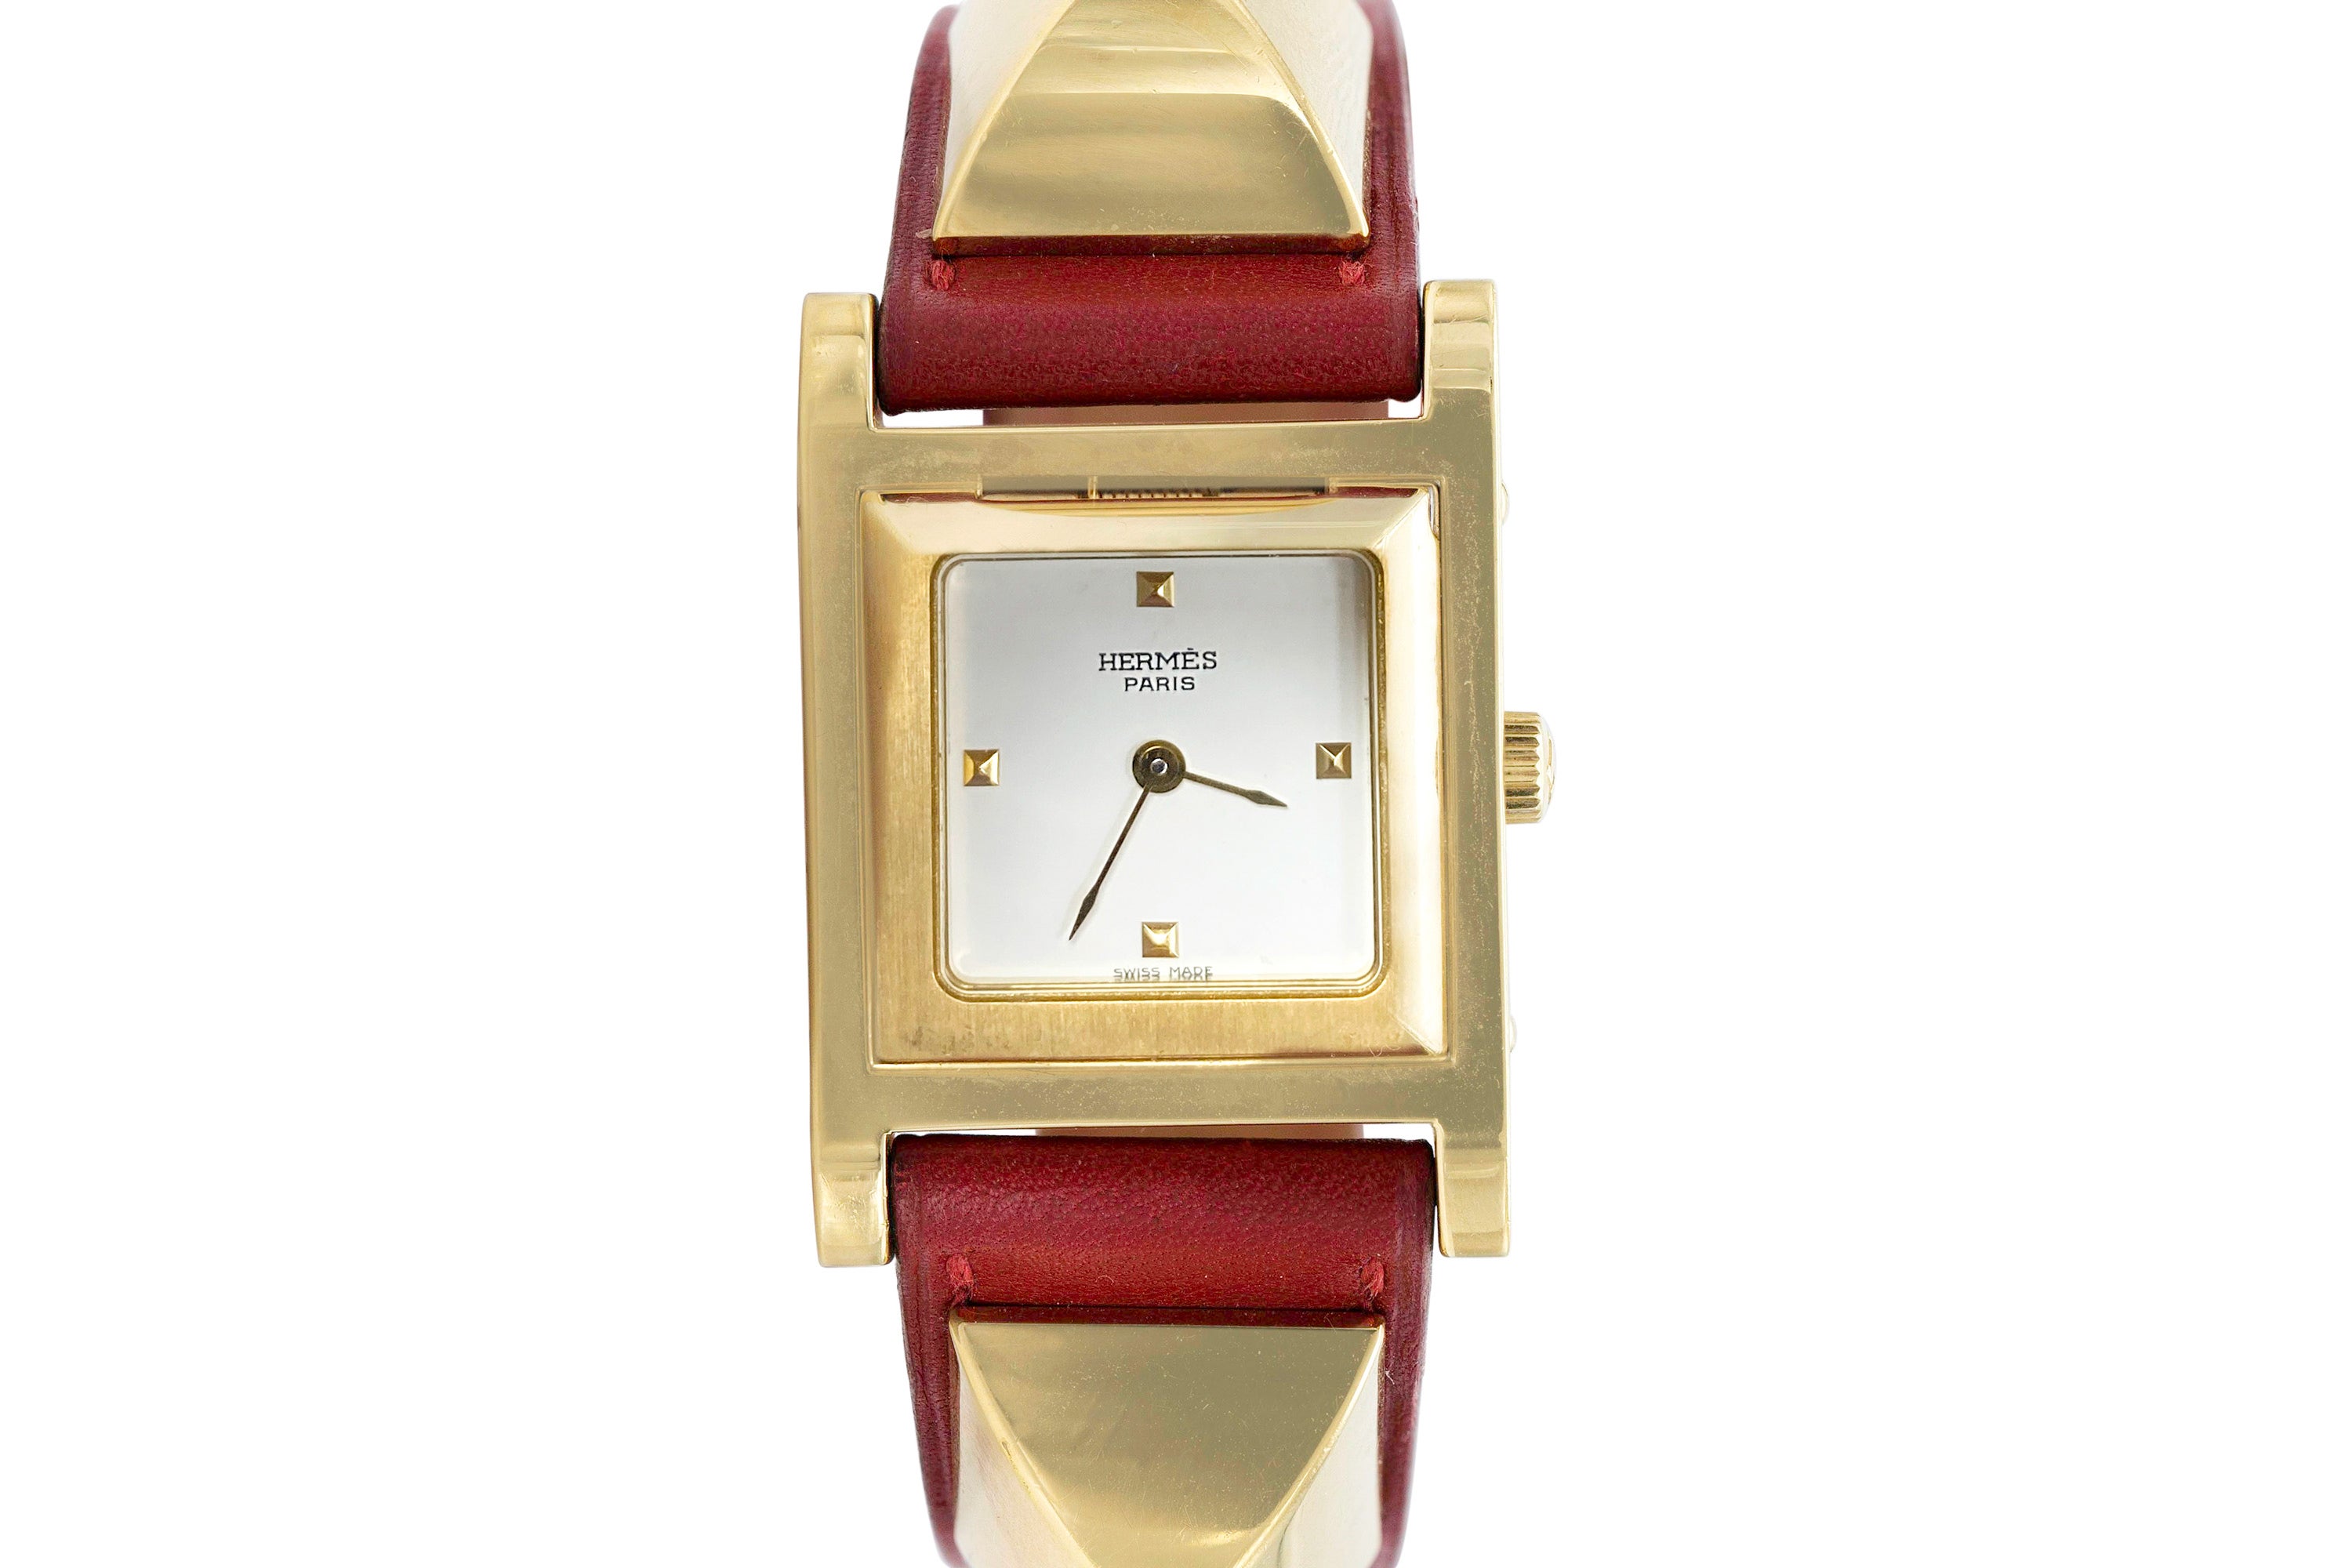 Hidden white face watch underneath the center dome, on a red leather band.
Signed by Hermes.